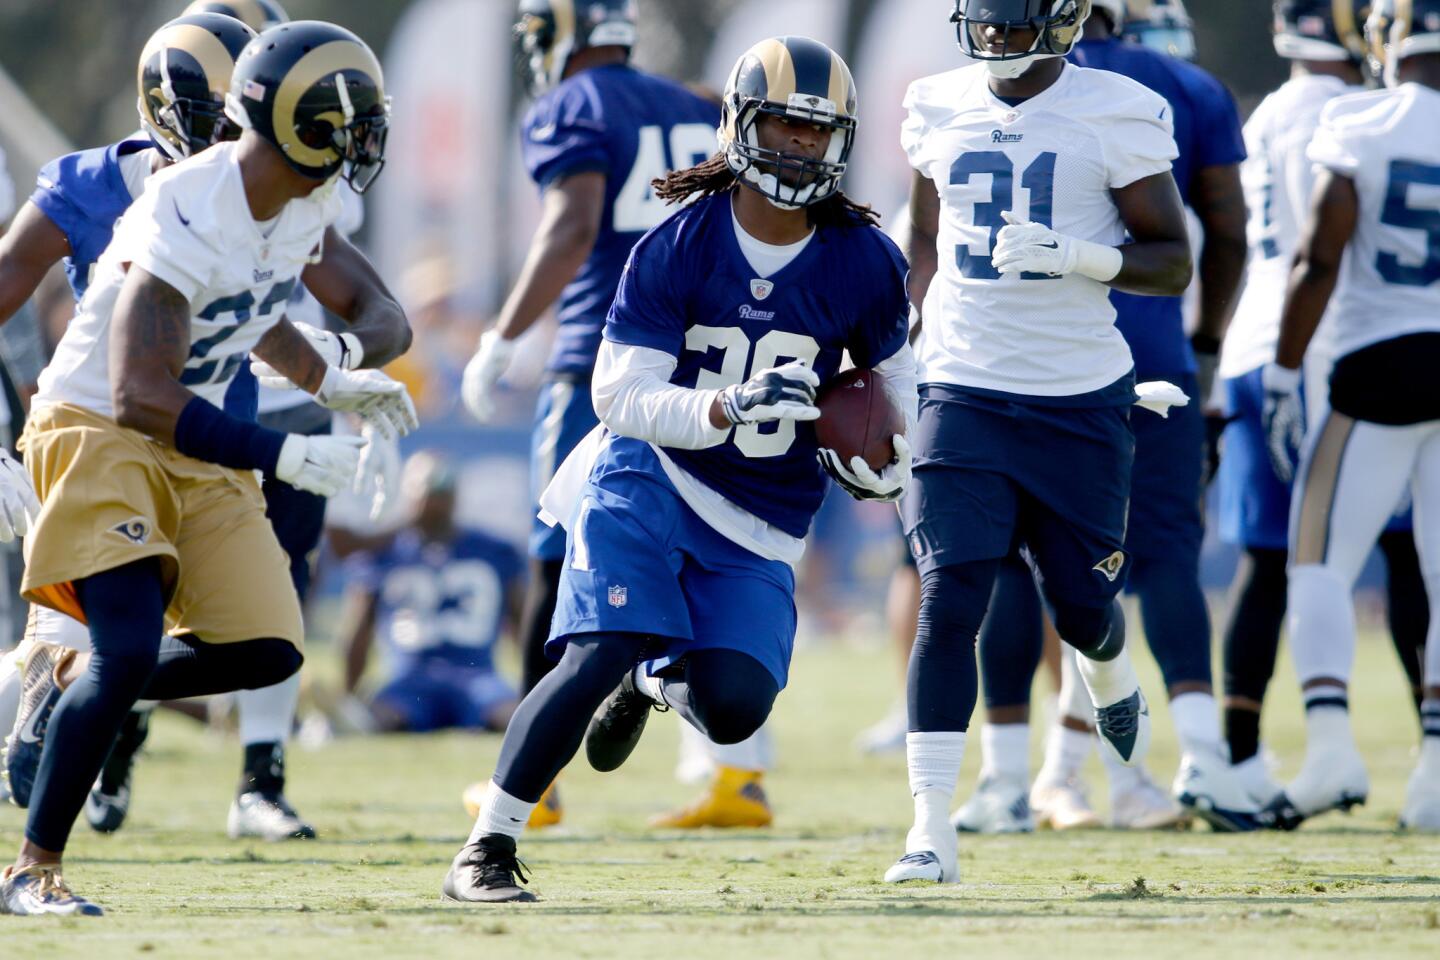 Running back Todd Gurley (30) carries the ball upfield during the Rams' first workout on Saturday at UC Irvine.